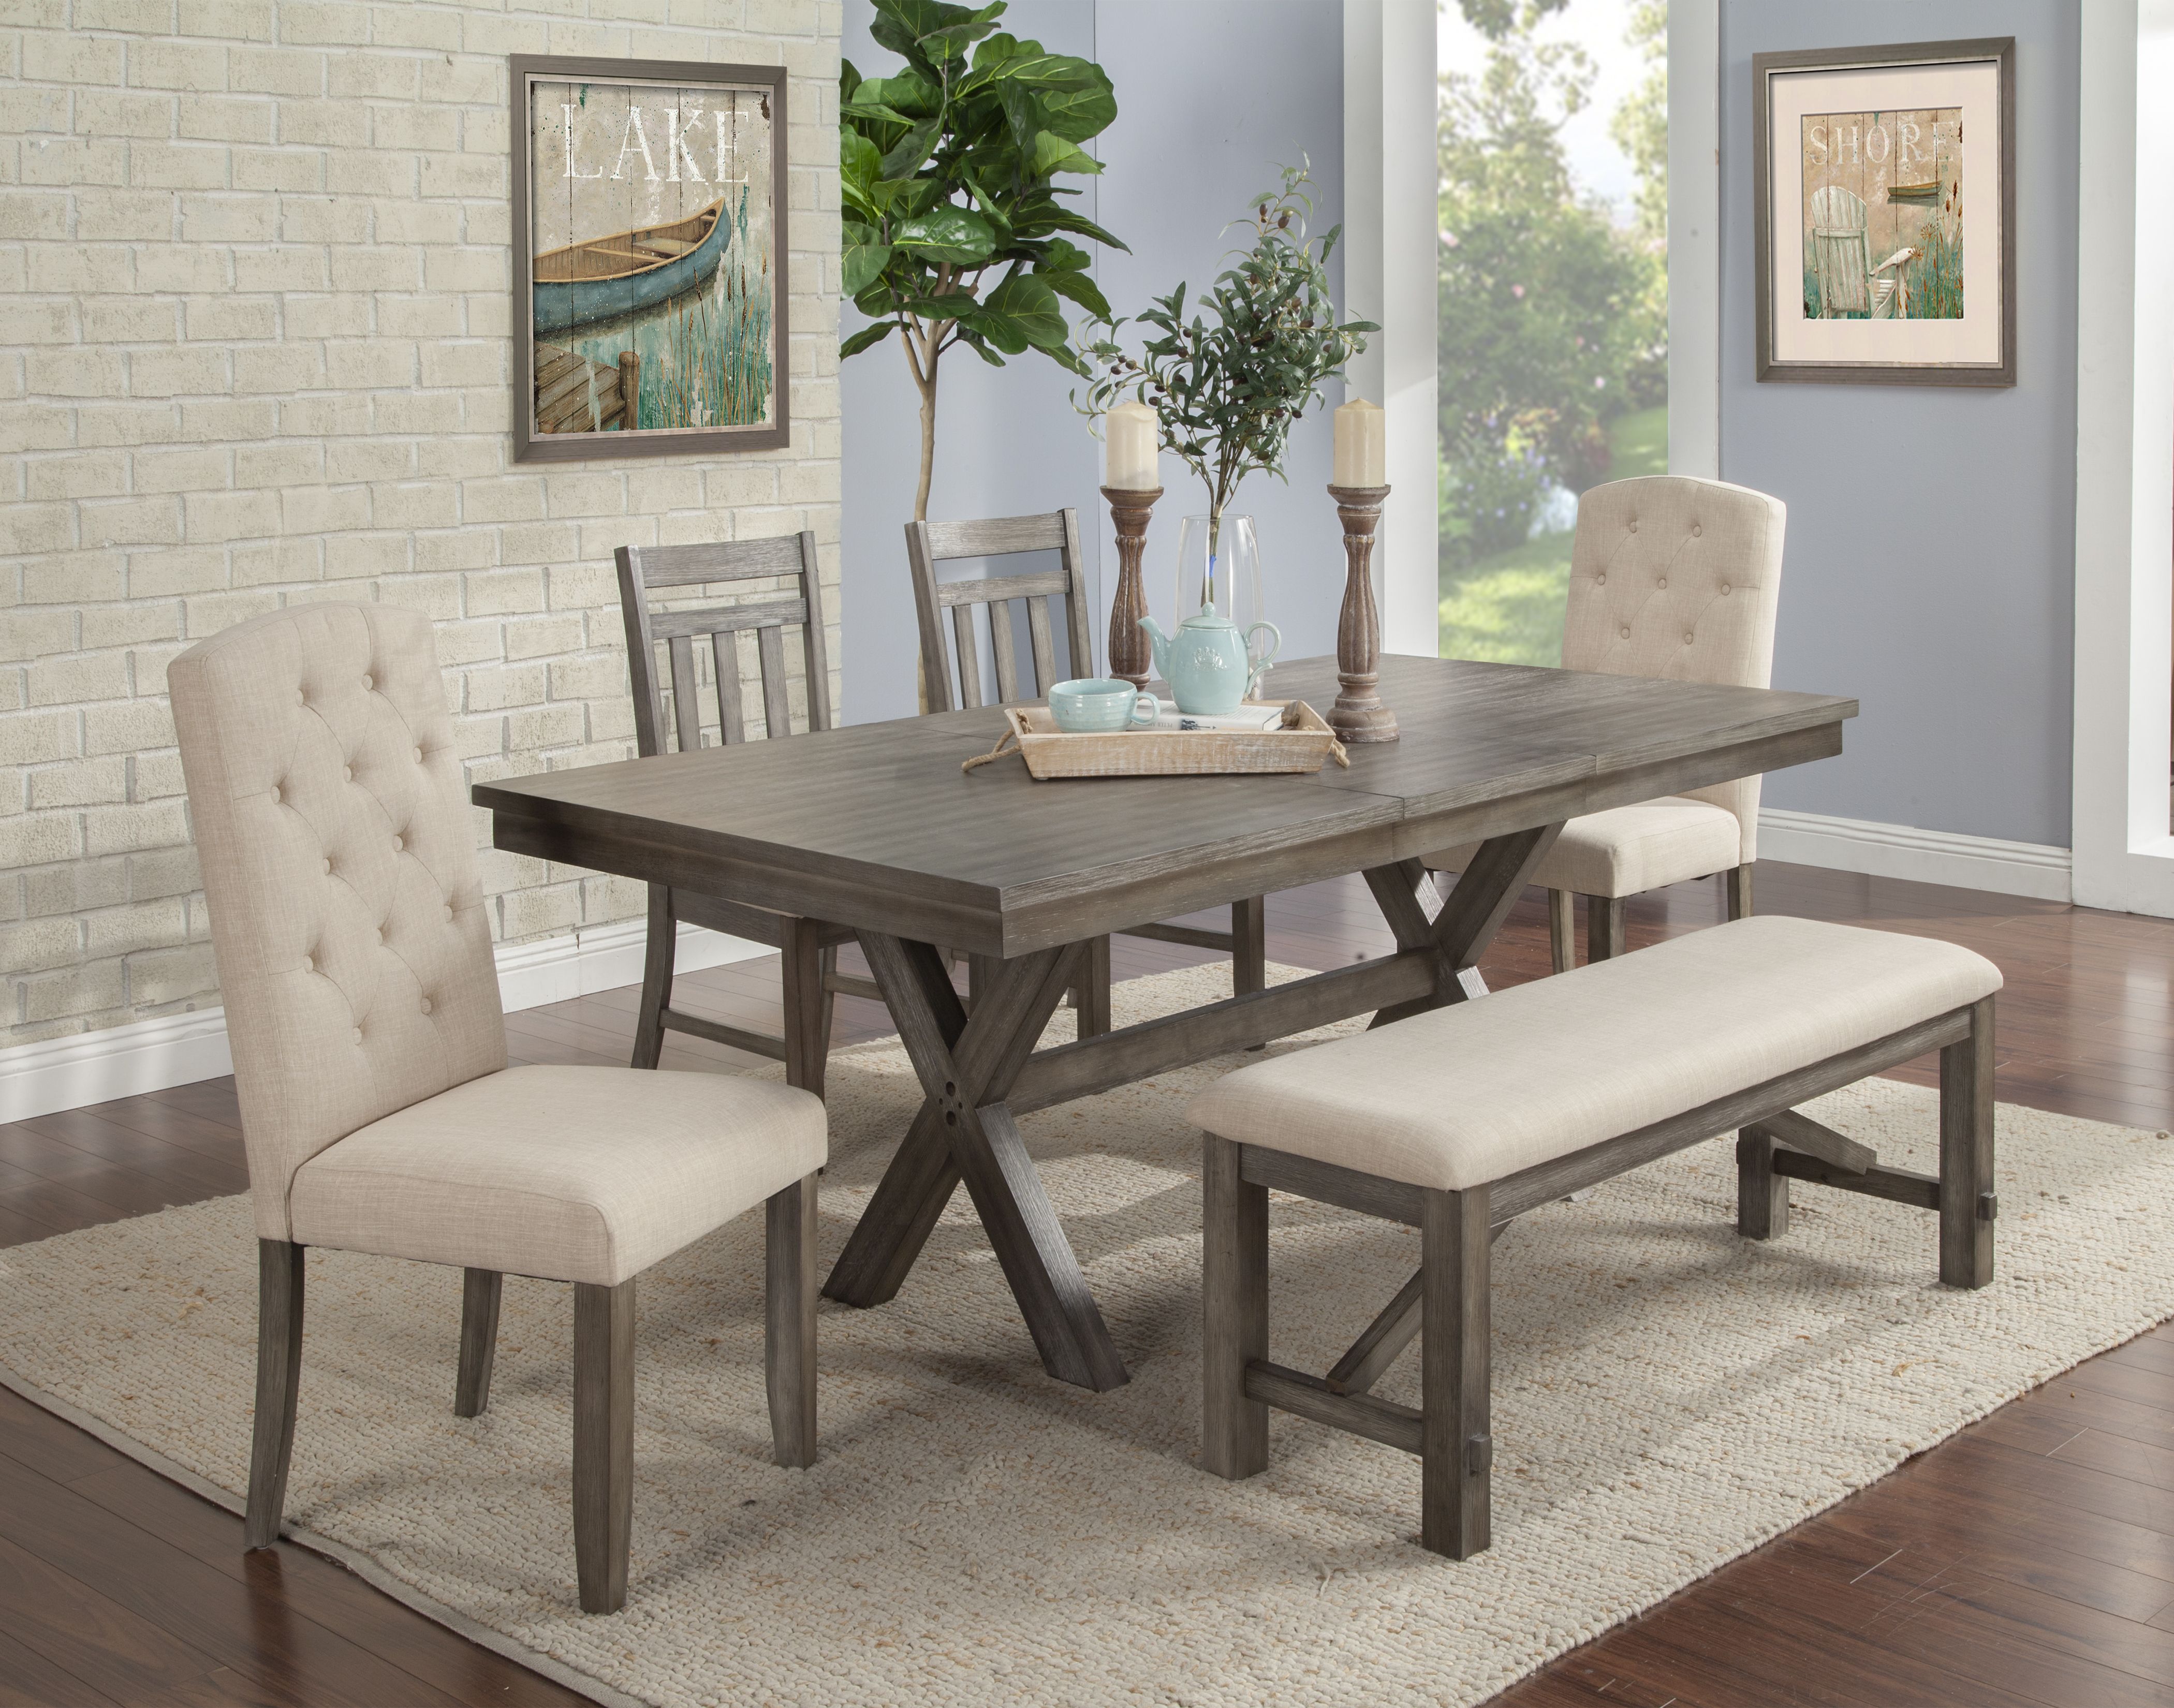 Shelter Cove 6 Piece Dining Set - VH3000-6PC